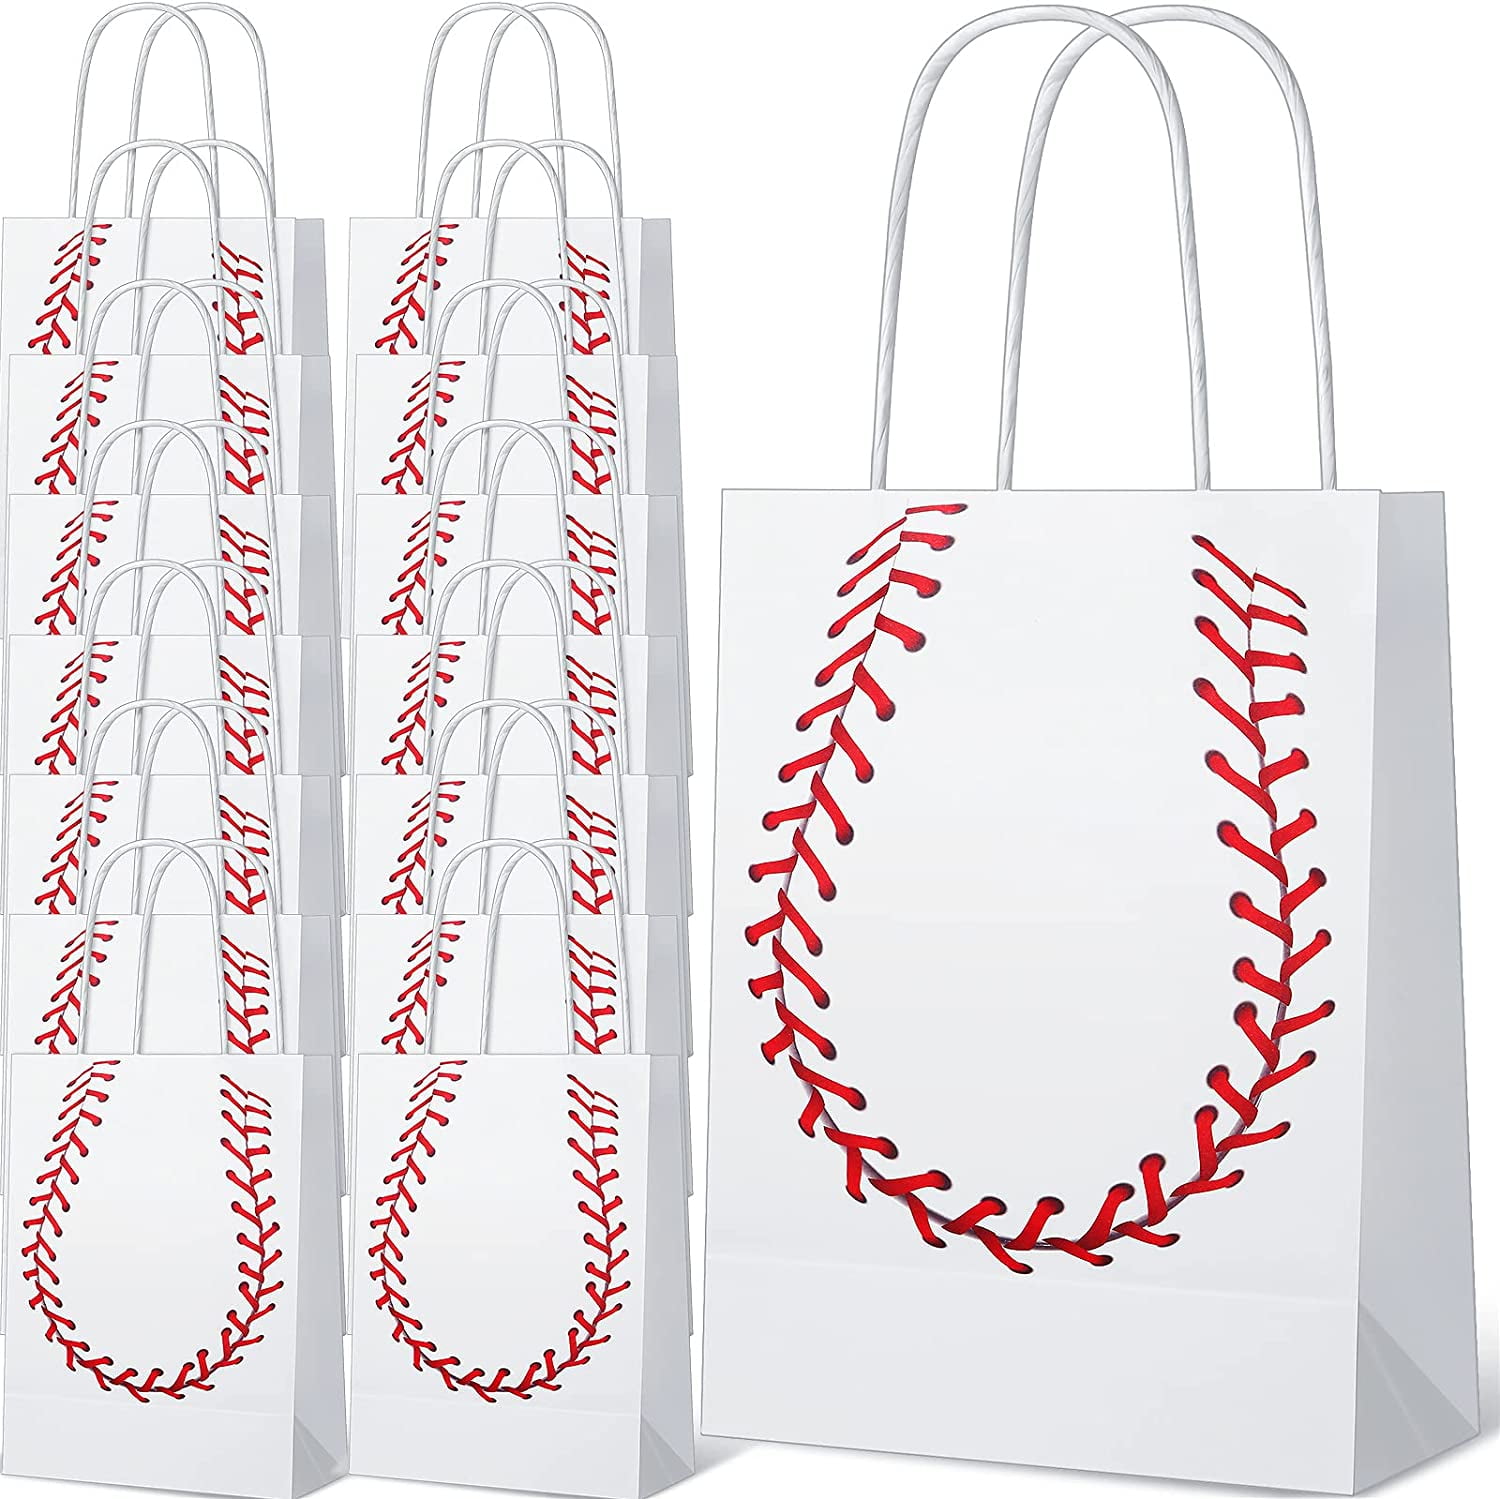 Leinuosen Baseball Party Favors Include Wooden Bat with Baseball Keychain,  Thank You Cards and Small Clear Resealable Polypropylene Bags for Boys Kids